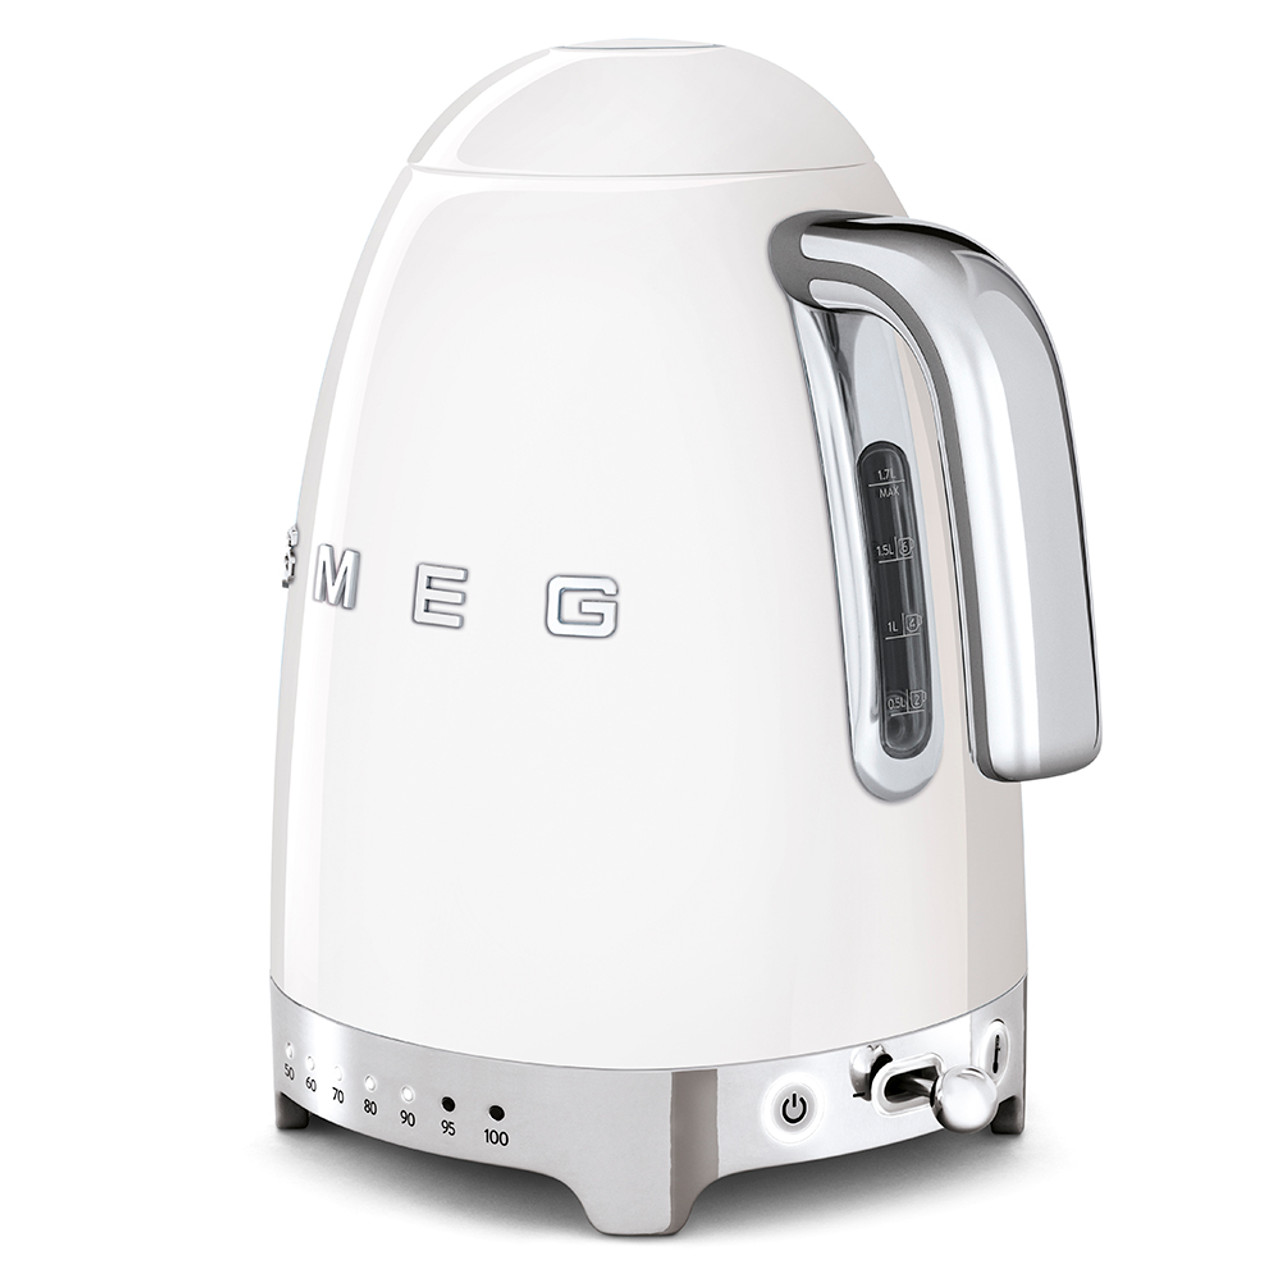 KLF04WHAU - 50'S Retro Style Aesthetic Kettle with Electric Variable Temp, WHITE